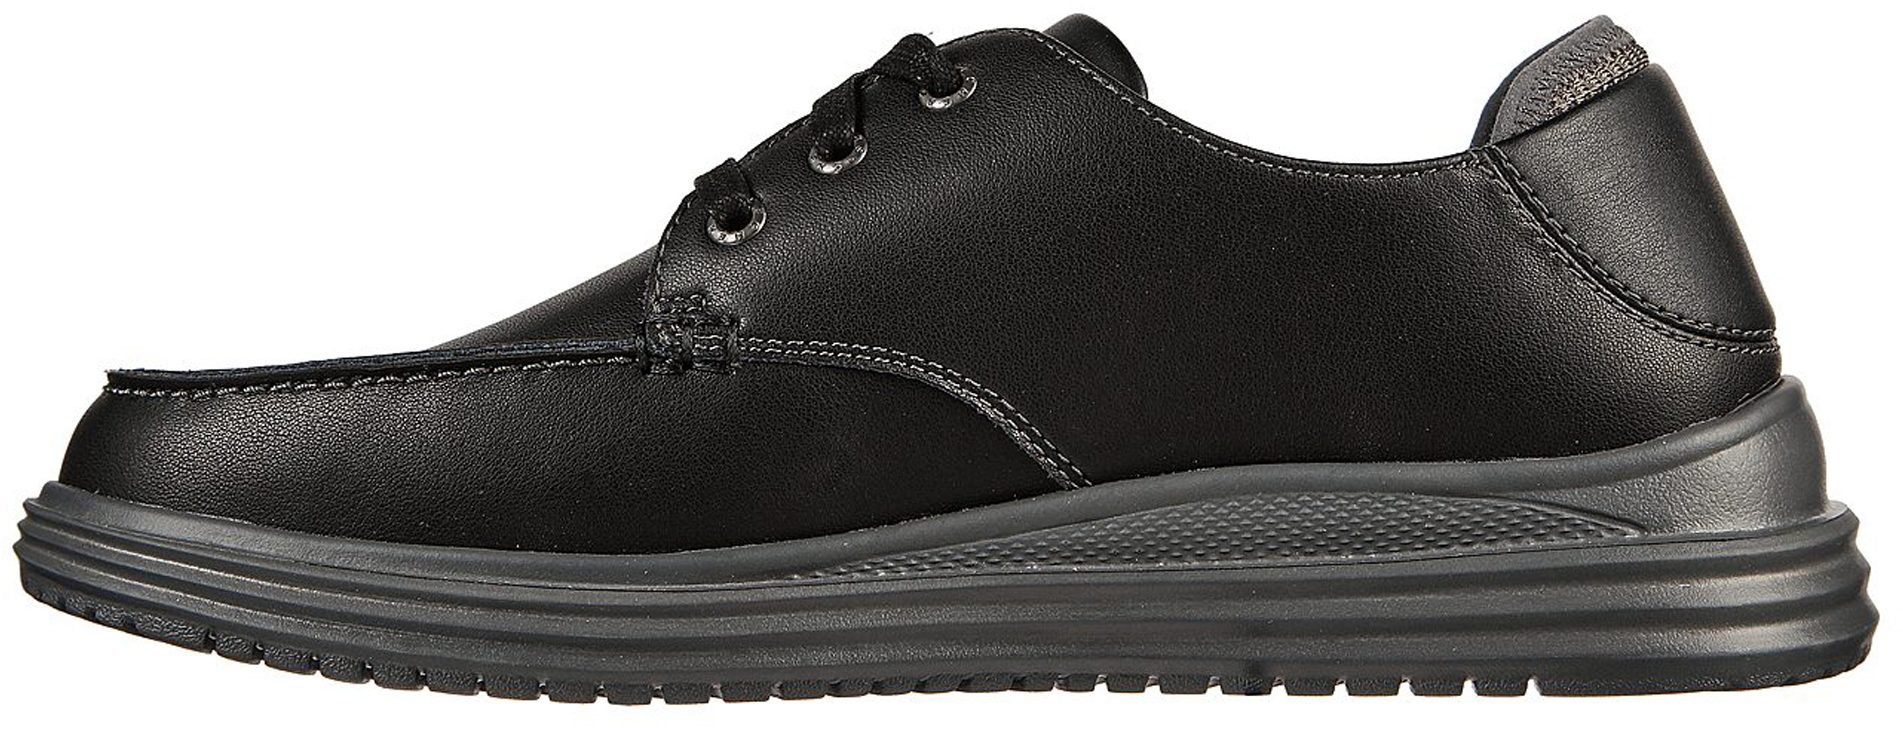 Skechers Proven - Valargo Black 204473 BLK - Casual Shoes - Humphries Shoes